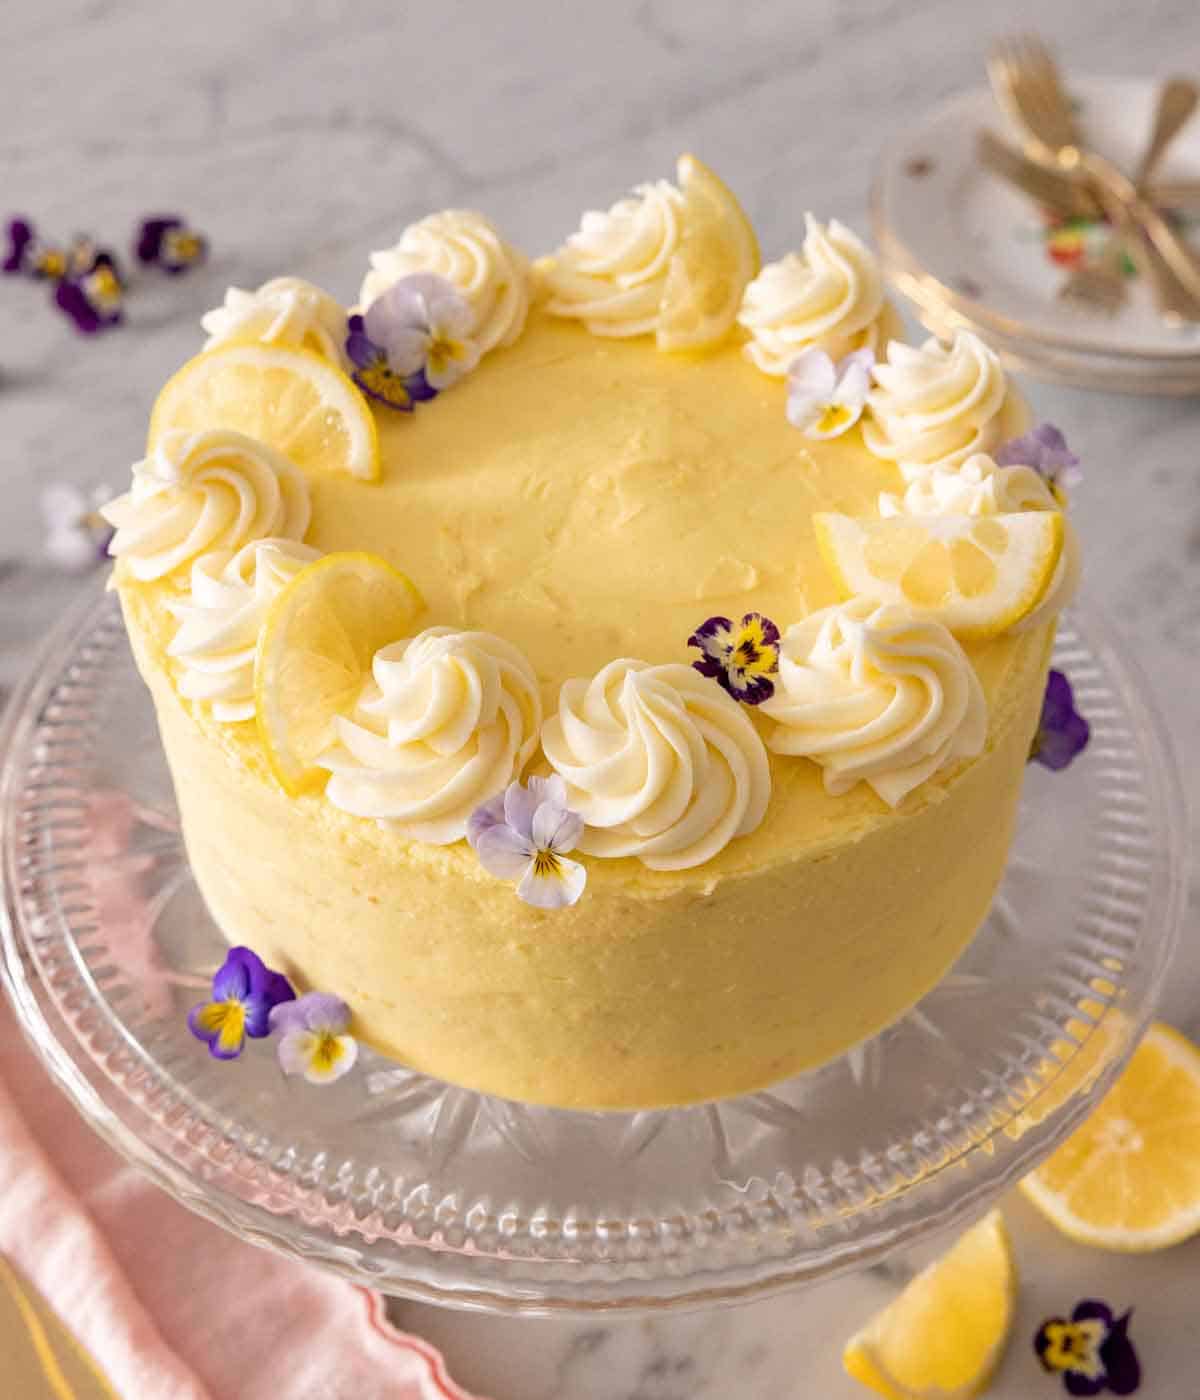 Overhead angled view of a lemon cake on a cake stand with edible purple flowers scattered around the cake and on the frosting.